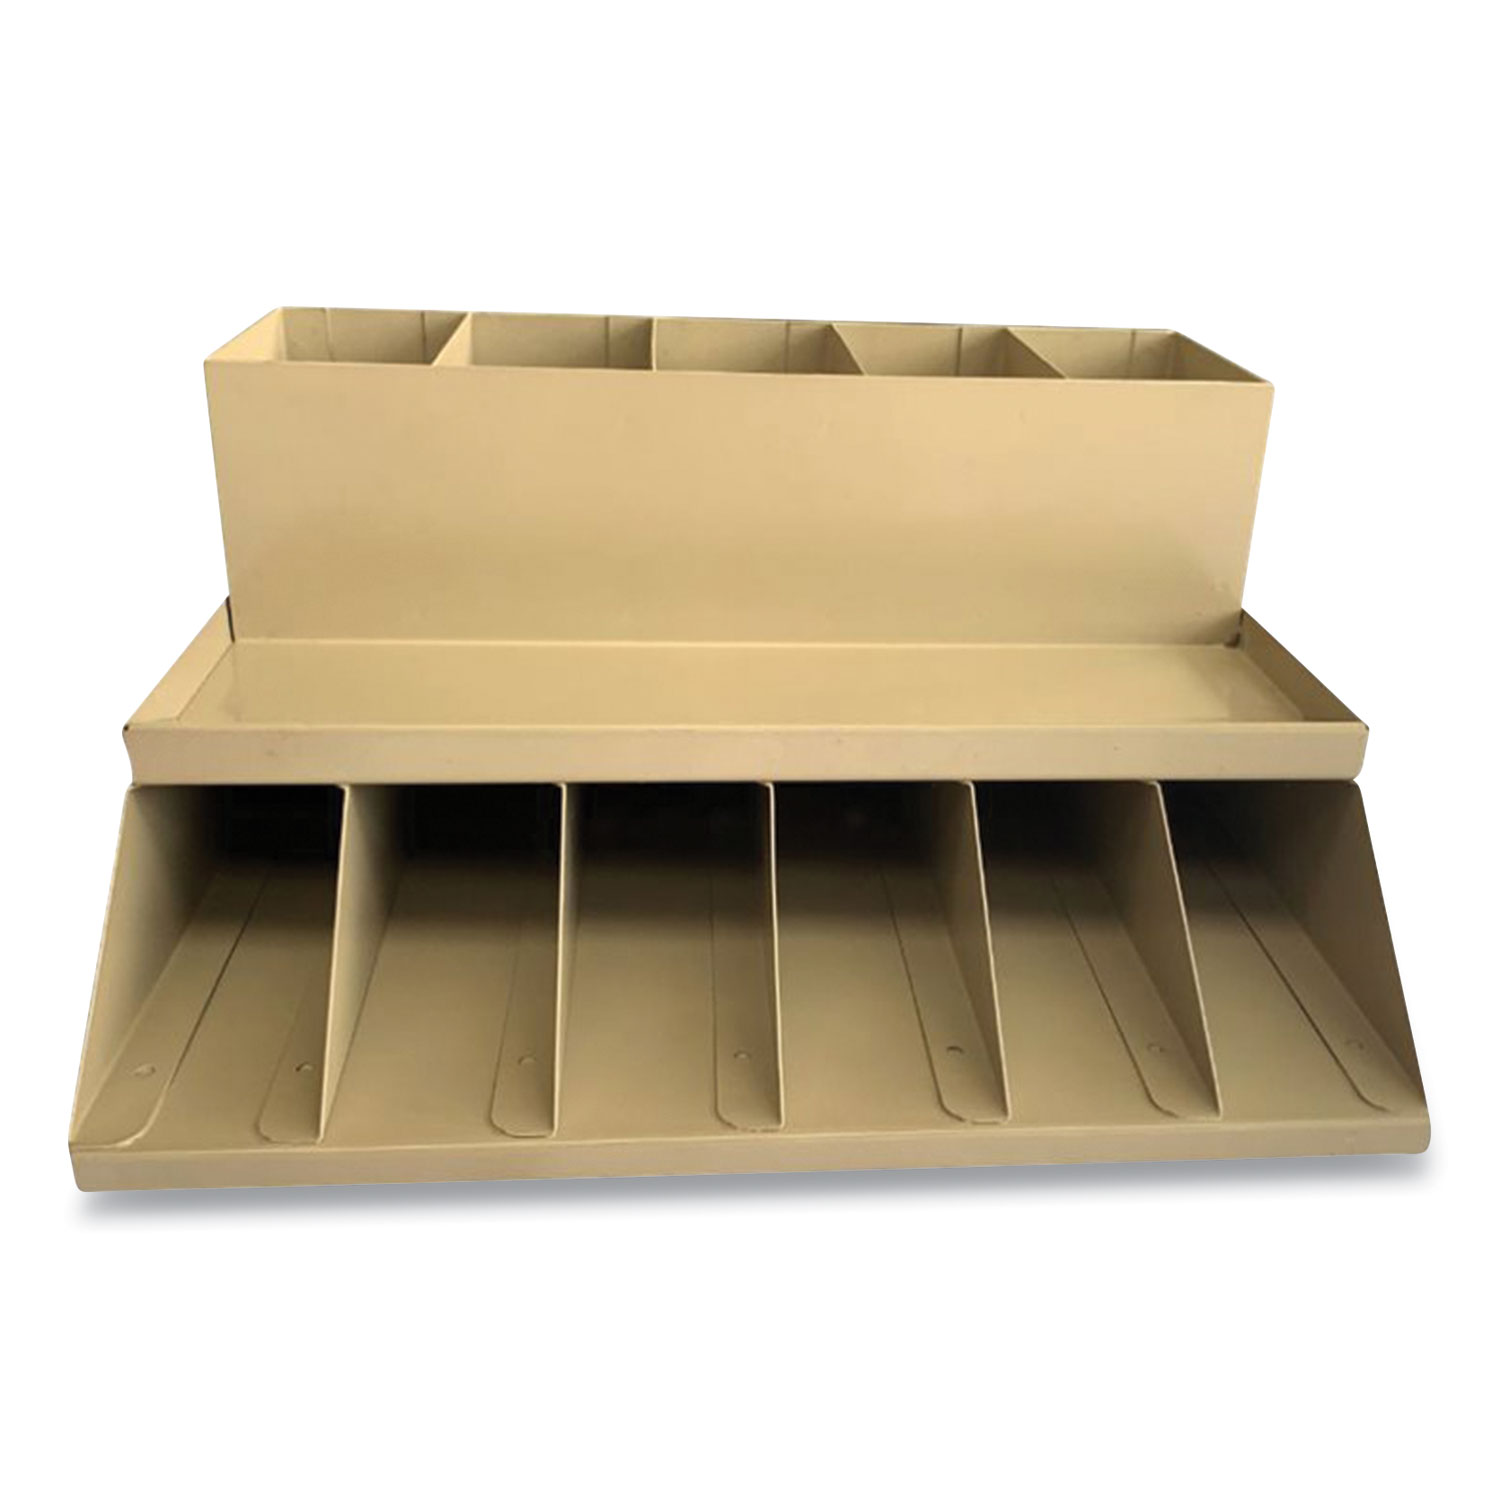  CONTROLTEK 500013 Coin Wrapper and Bill Strap Two-Tier Rack, 11 Compartments, 9.38 x 8.13 4.63, Metal, Pebble Beige (CNK24418505) 